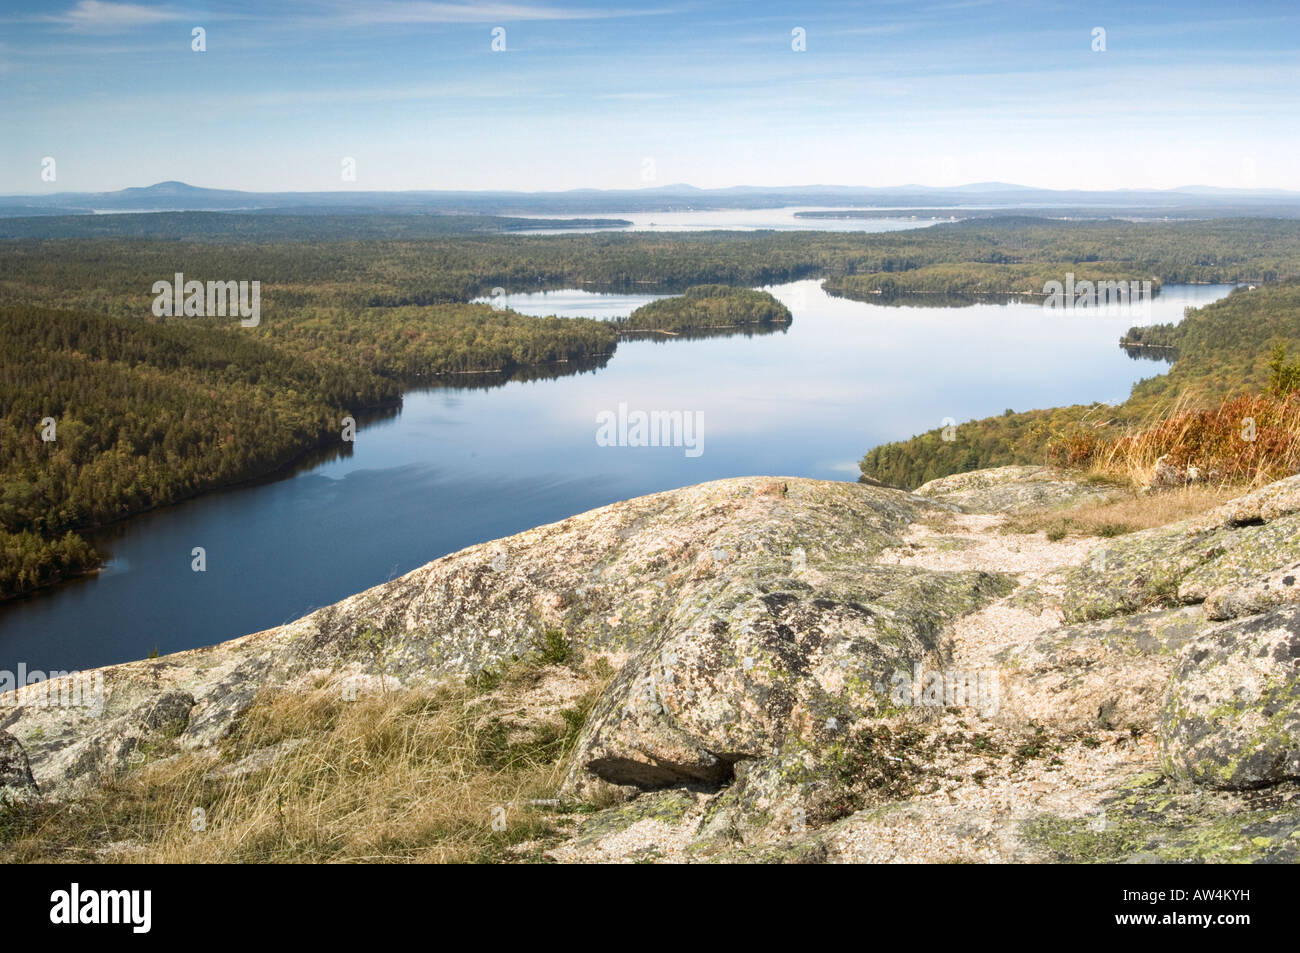 View from Beech Mtn over looking Long Pond Beech Mtn trail Acadia National Park Maine USA Stock Photo